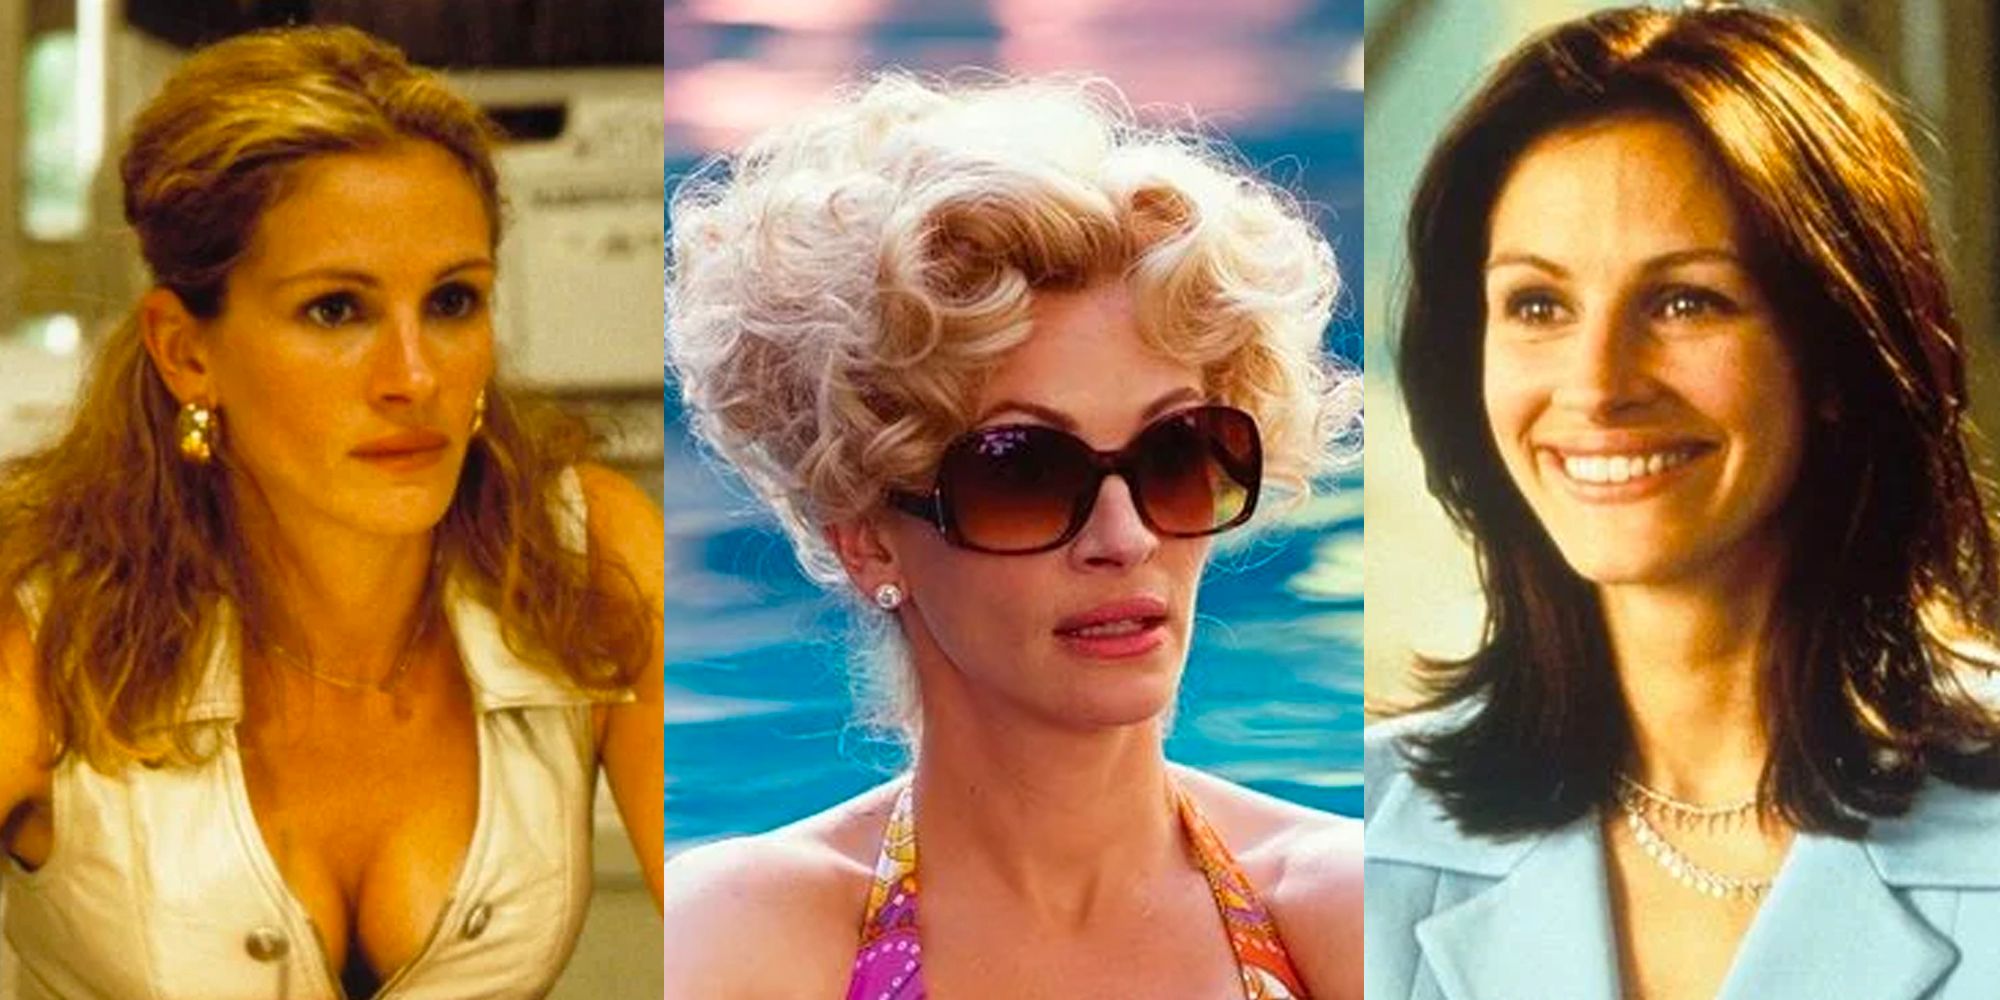 Julia Roberts' 13 Best Movies, According To Rotten Tomatoes